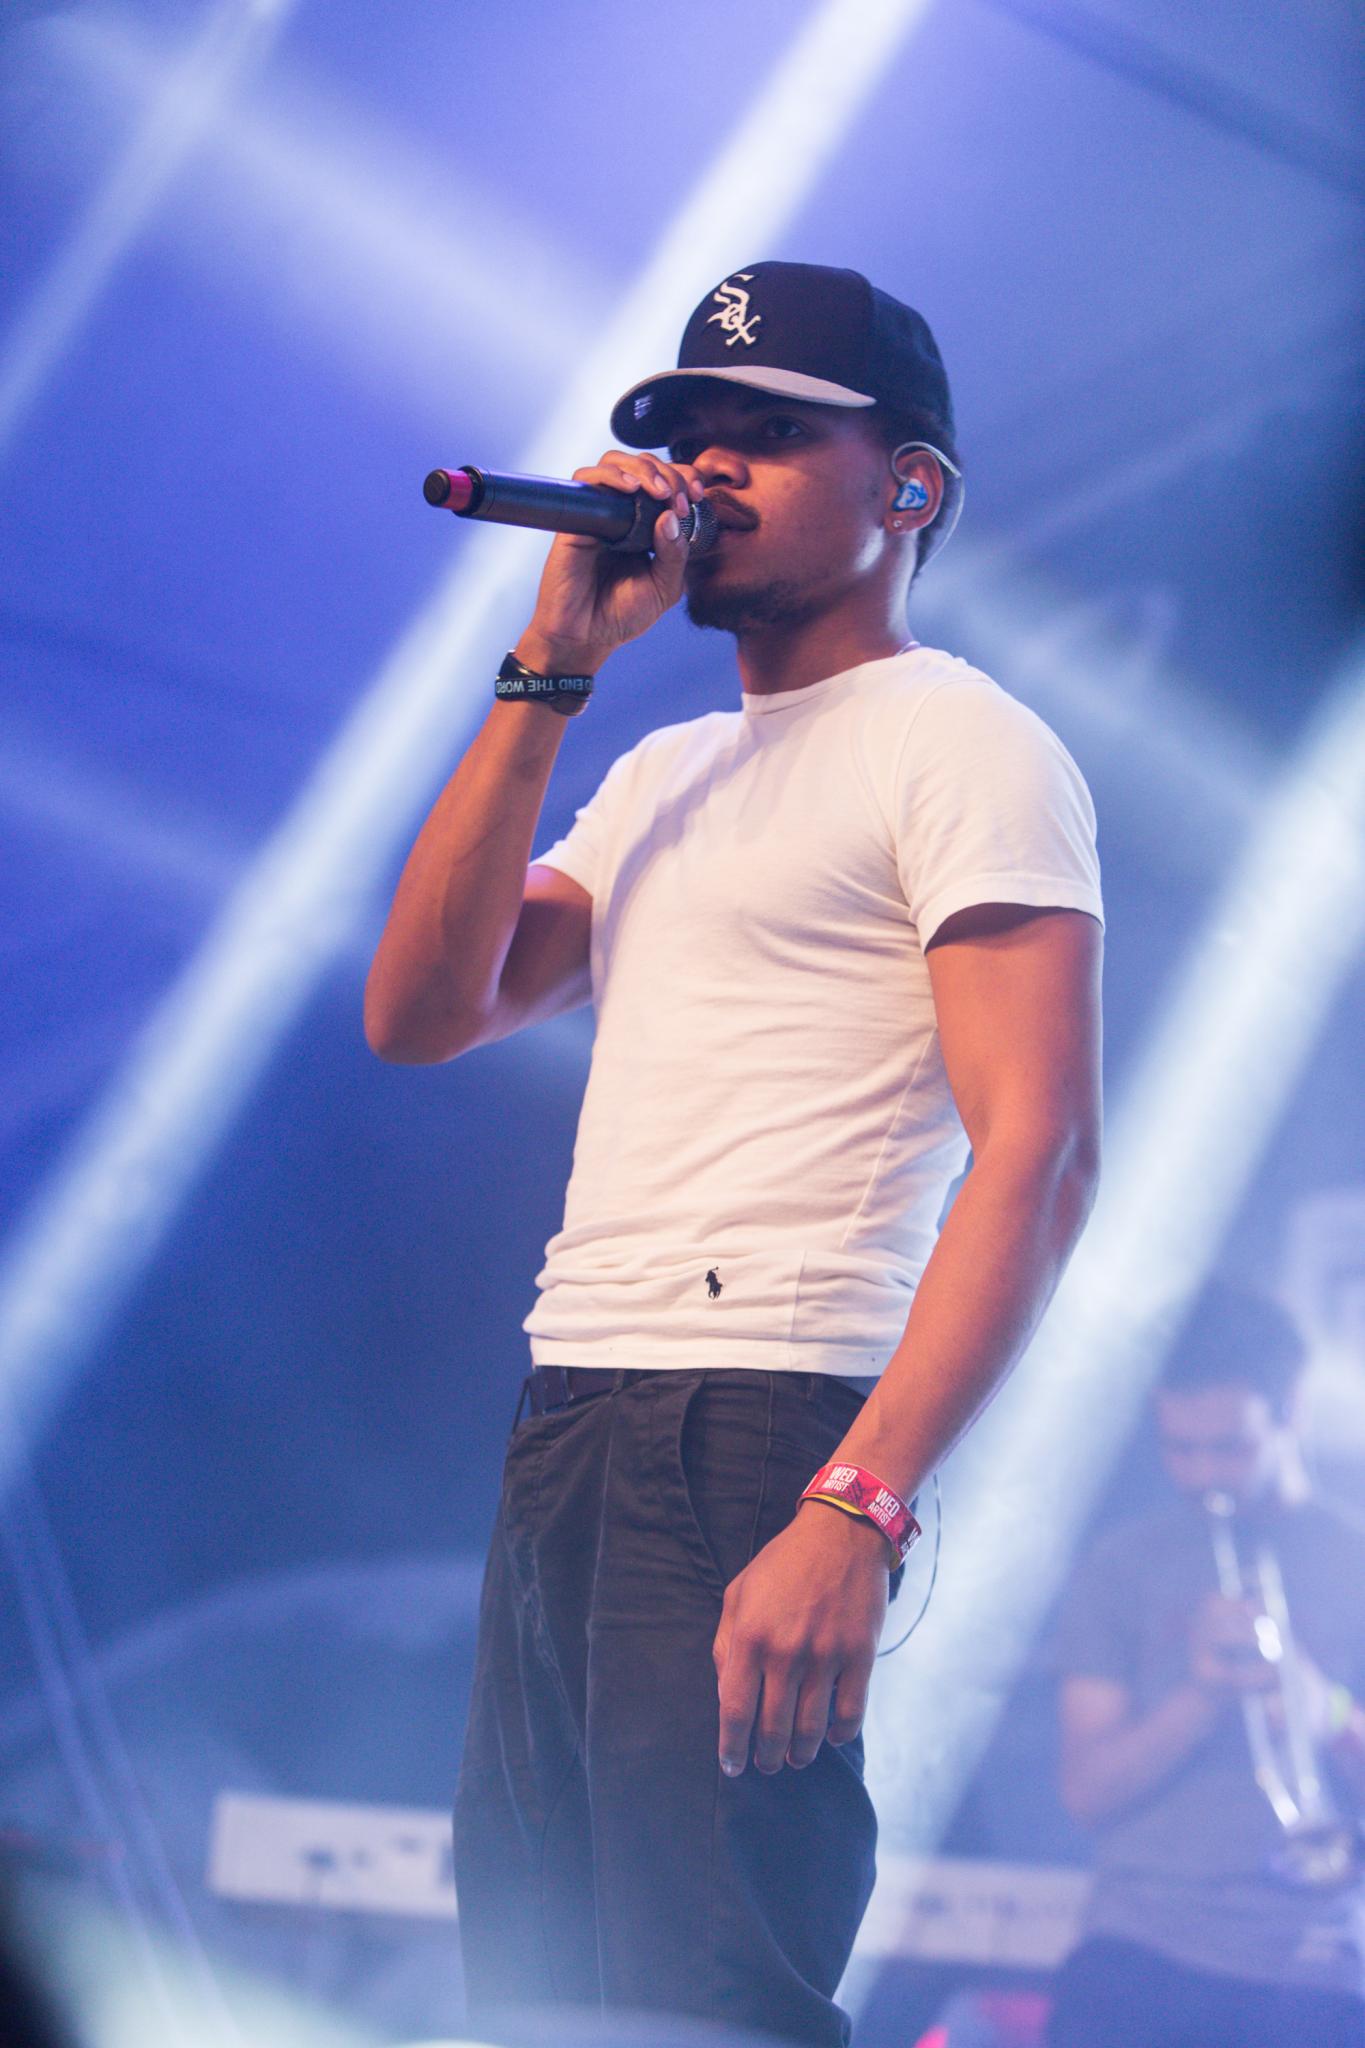 Happy Birthday Chance! 16 Thought Lyrics We’ll Never Forget